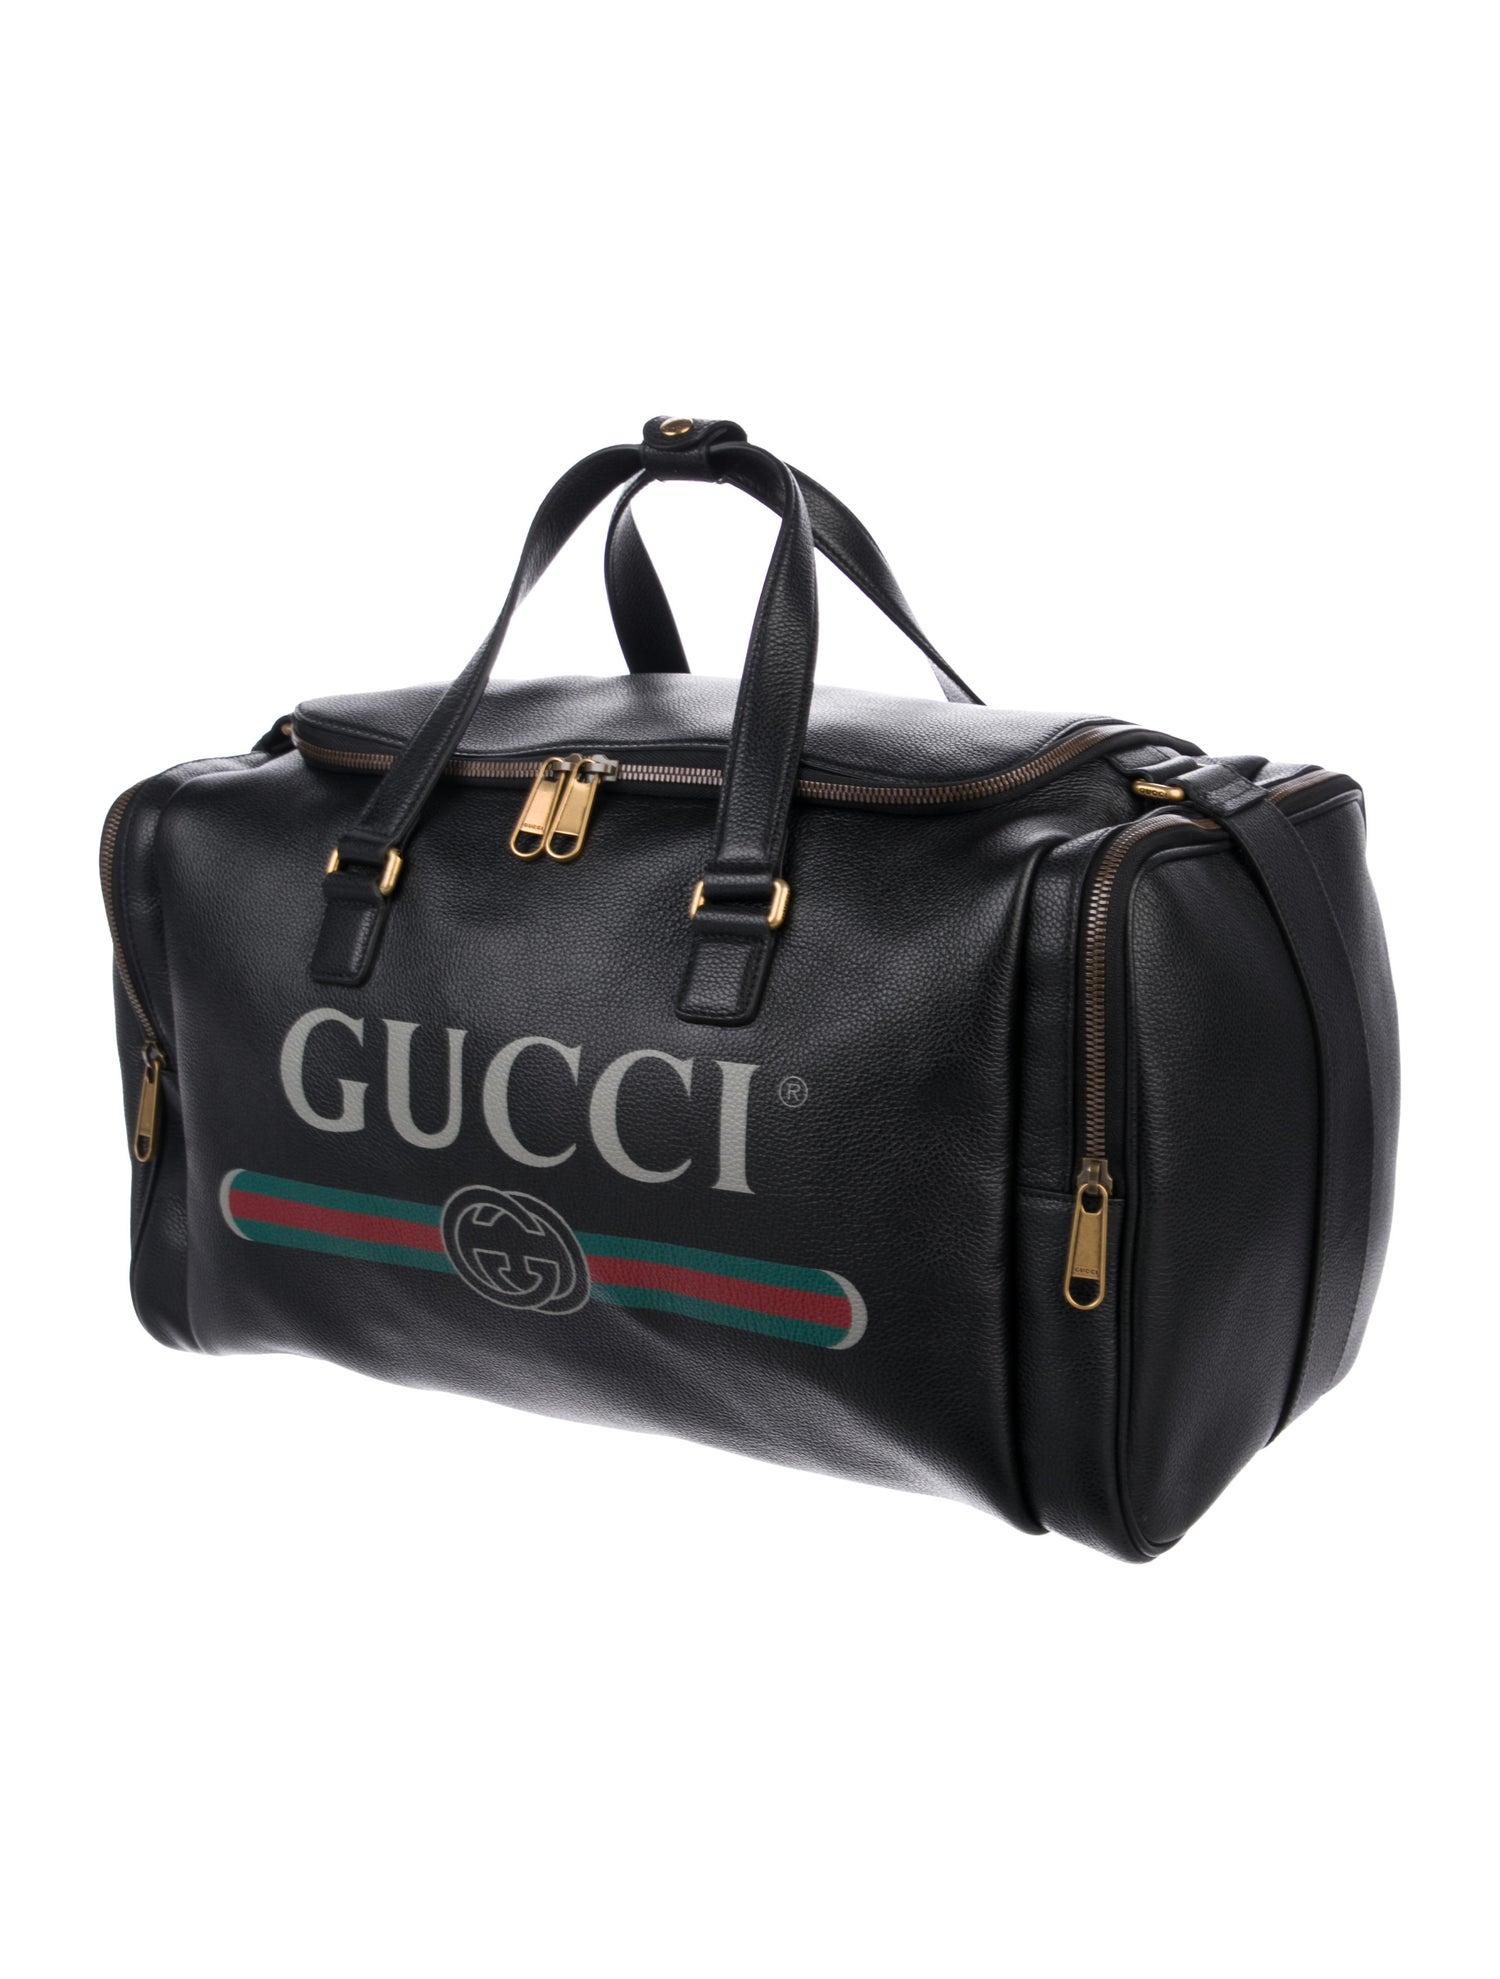 Gucci NEW Black Leather Gold Duffle Weekender Tote Top Handle Satchel Bag

Leather 
Gold-tone hardware
Woven lining
Zipper closure
Handle drop 8